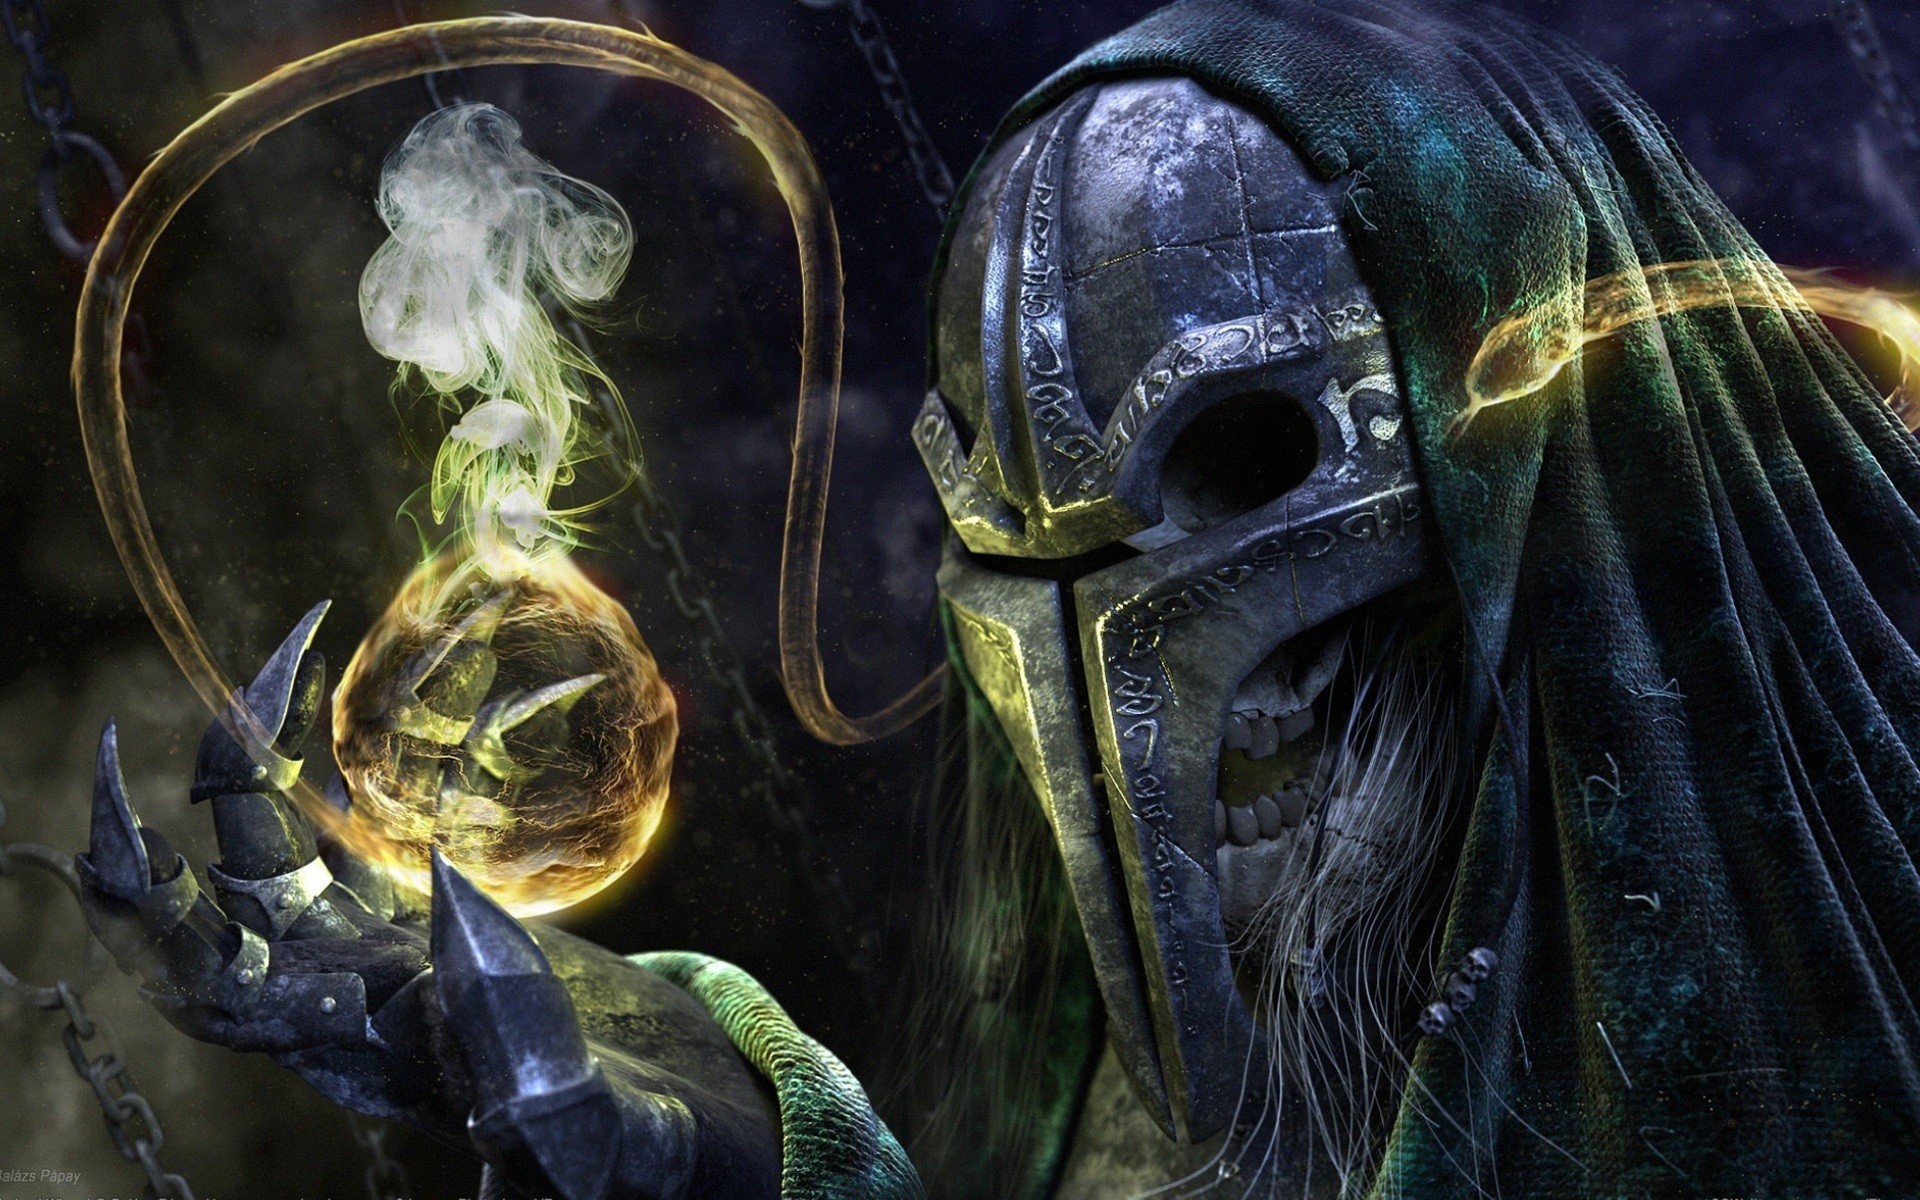 1920x1200 Undead Wizard 626056. SHARE. TAGS: Wizard Evil Christmas Undead